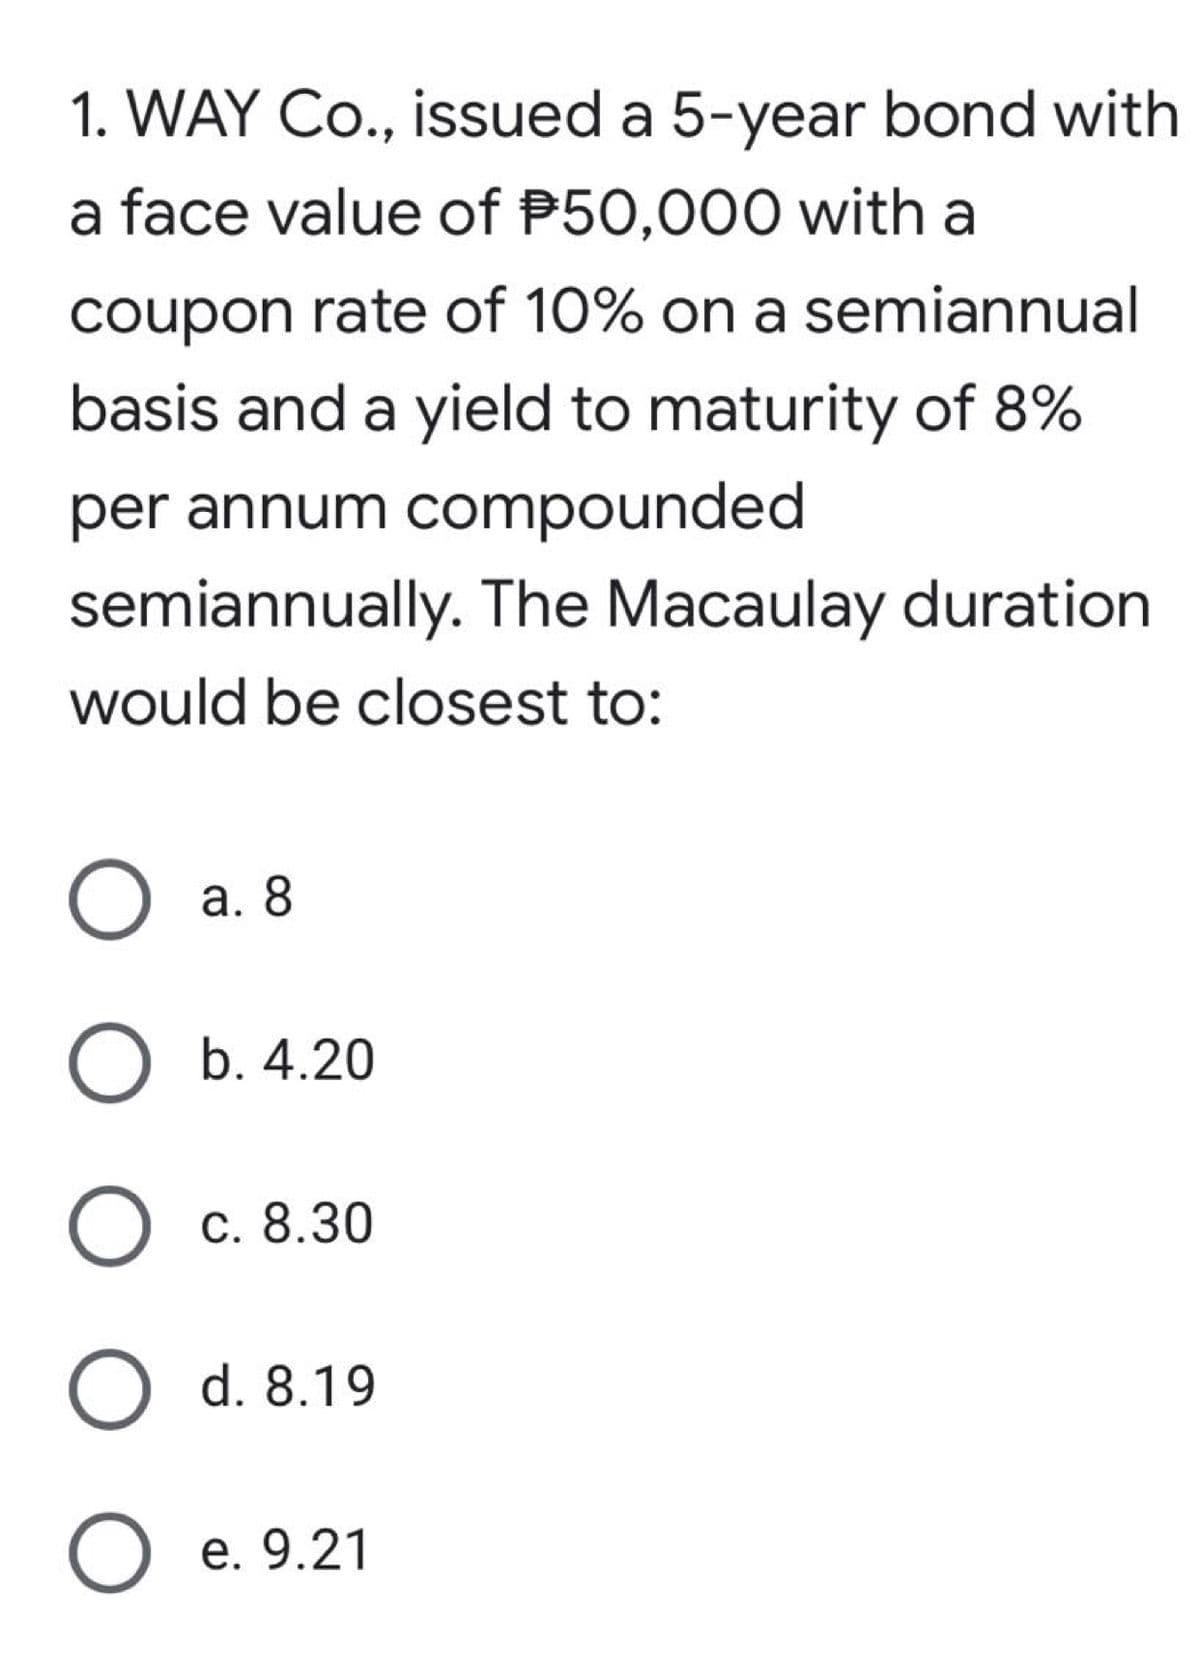 1. WAY Co., issued a 5-year bond with
a face value of P50,000 with a
coupon rate of 10% on a semiannual
basis and a yield to maturity of 8%
per annum compounded
semiannually. The Macaulay duration
would be closest to:
O a. 8
О Б.4.20
с. 8.30
O d. 8.19
О е. 9.21
e.9
